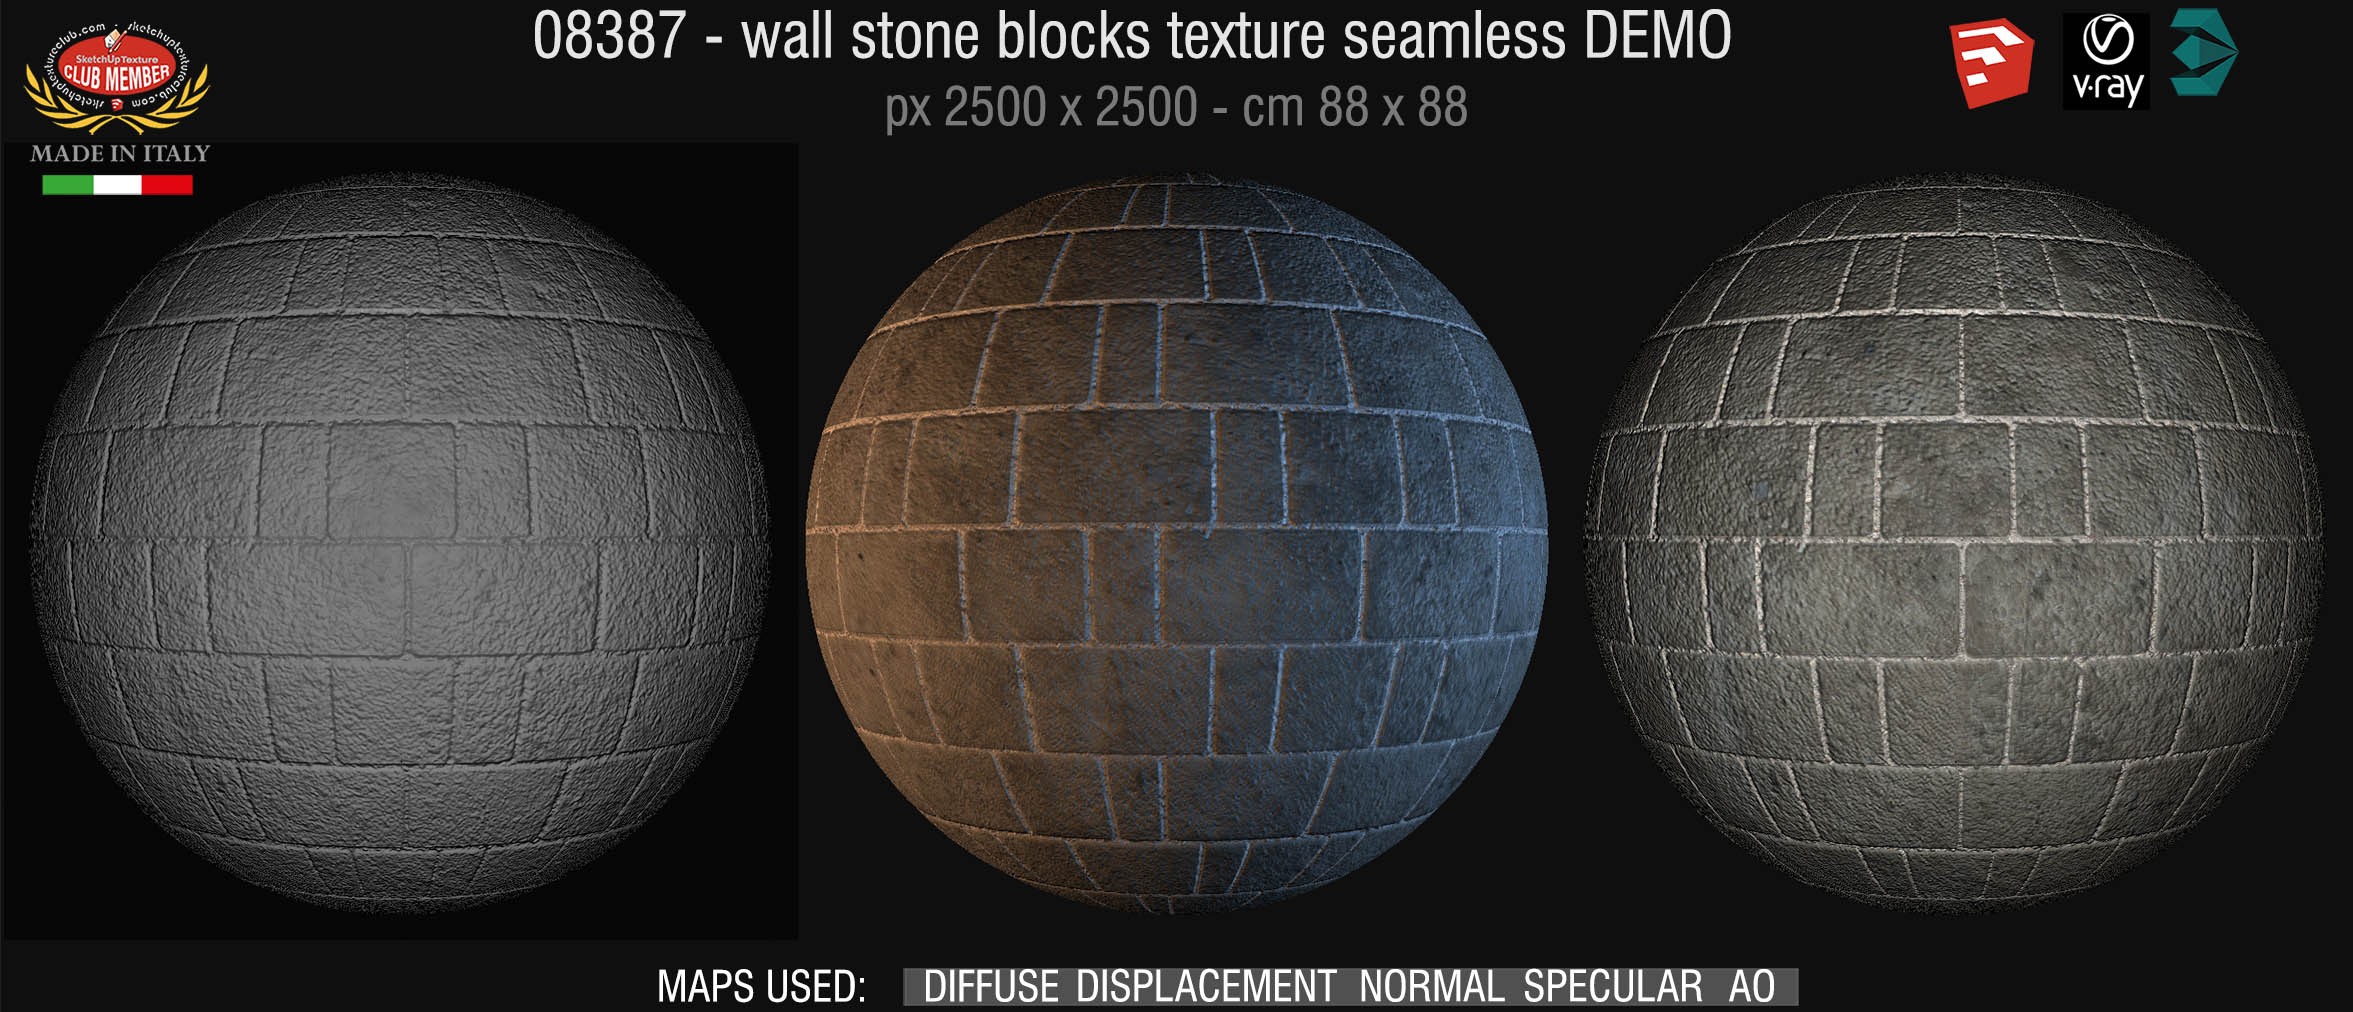 08387 HR Wall stone with regular blocks texture + maps DEMO